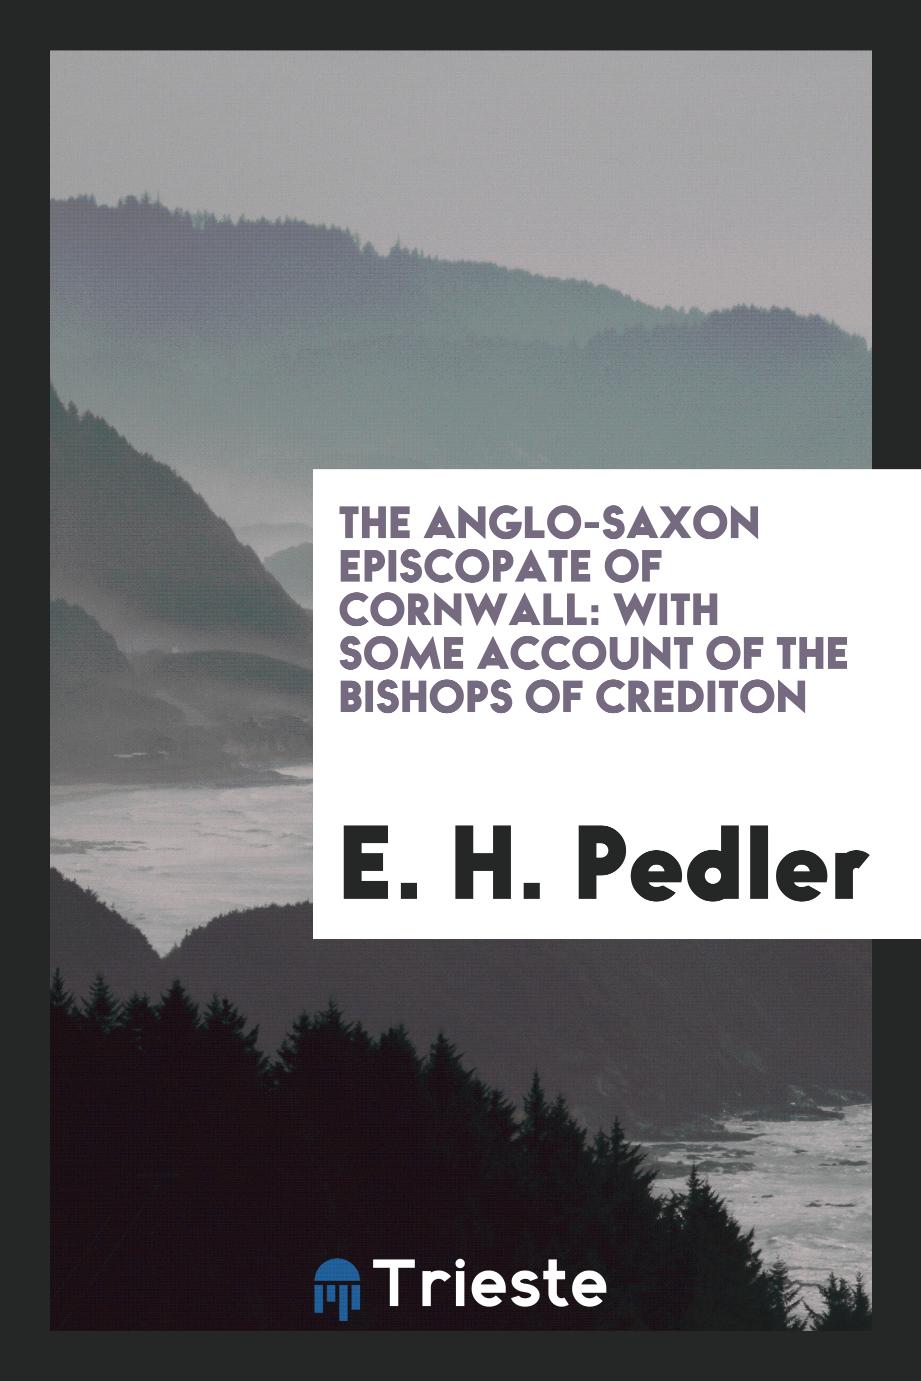 The Anglo-Saxon Episcopate of Cornwall: With Some Account of the Bishops of Crediton